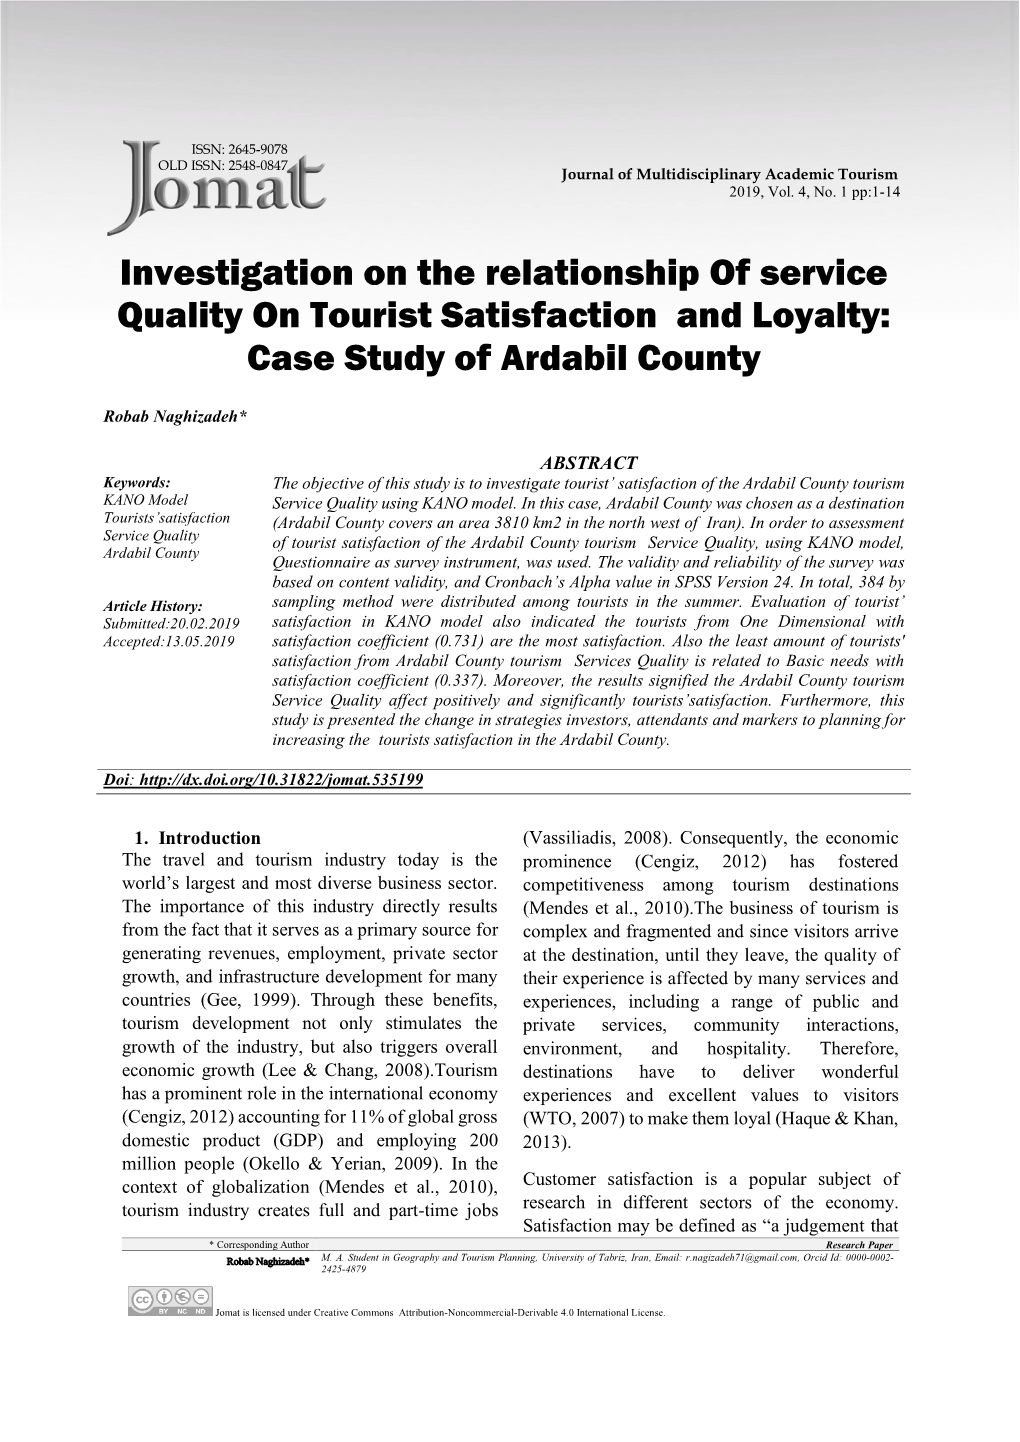 Investigation on the Relationship of Service Quality on Tourist Satisfaction and Loyalty: Case Study of Ardabil County